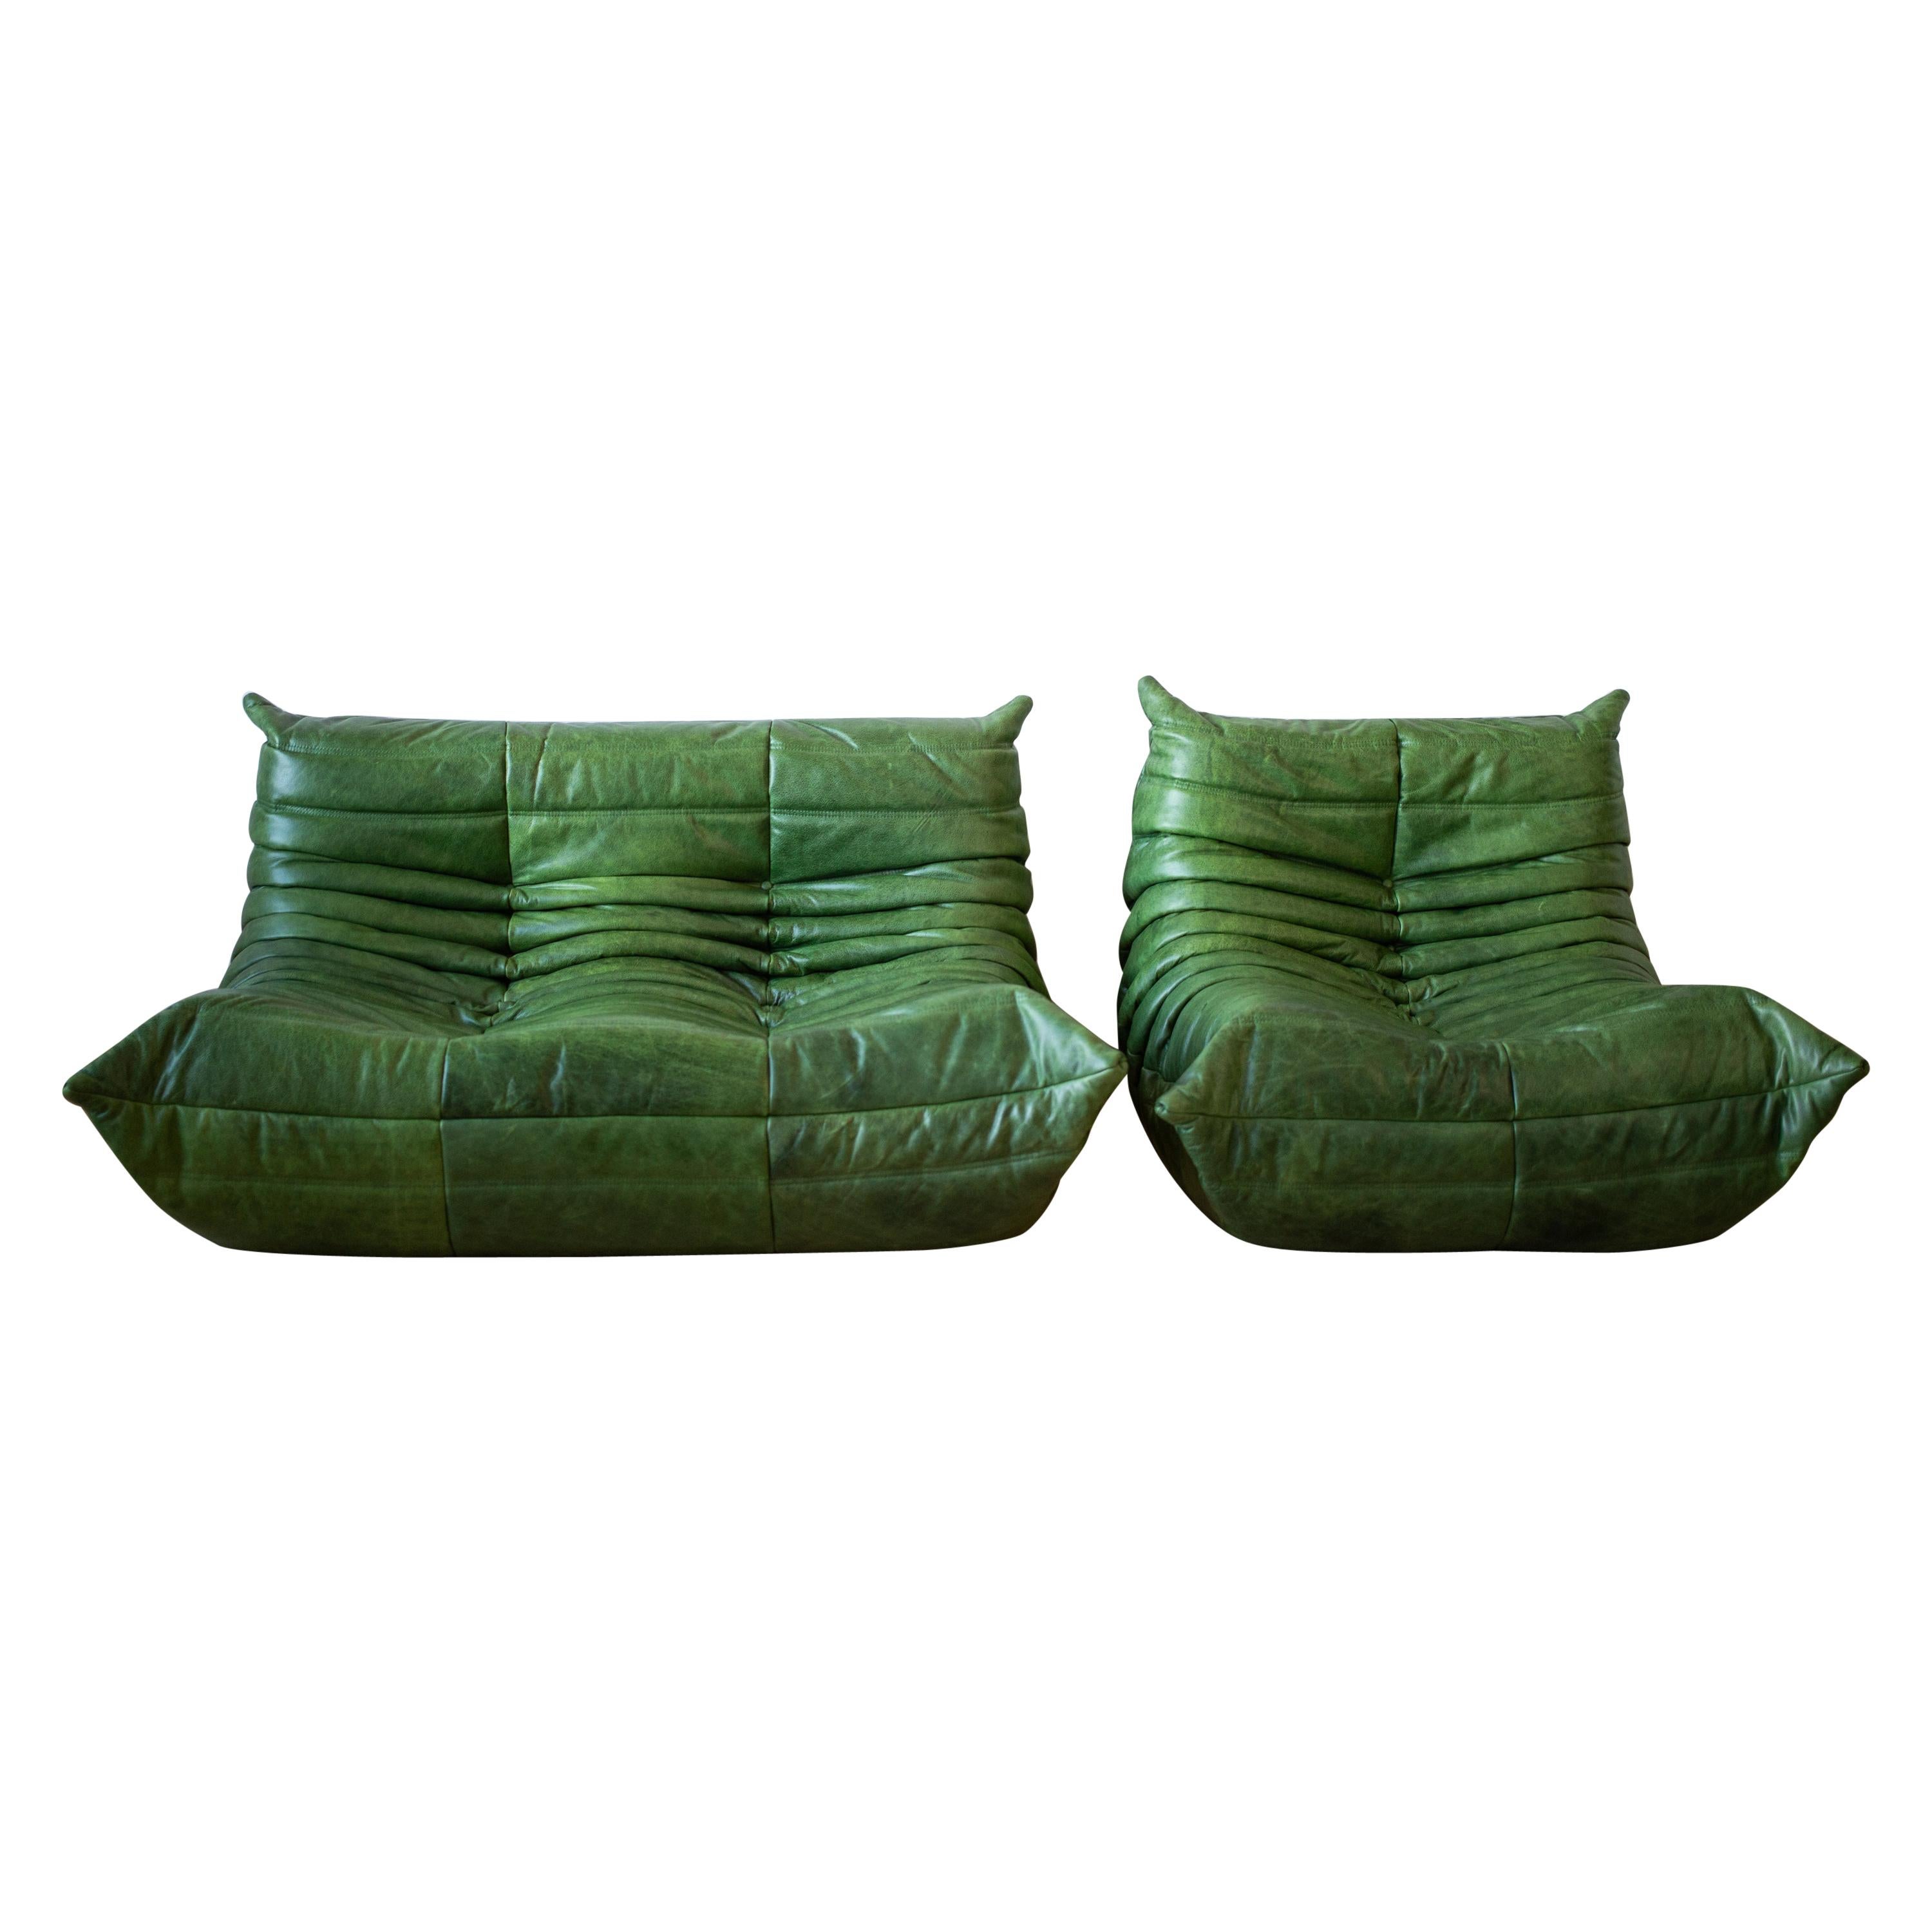 Togo Two-Piece Set, Design by Michel Ducaroy, Dubai Green Leather For Sale